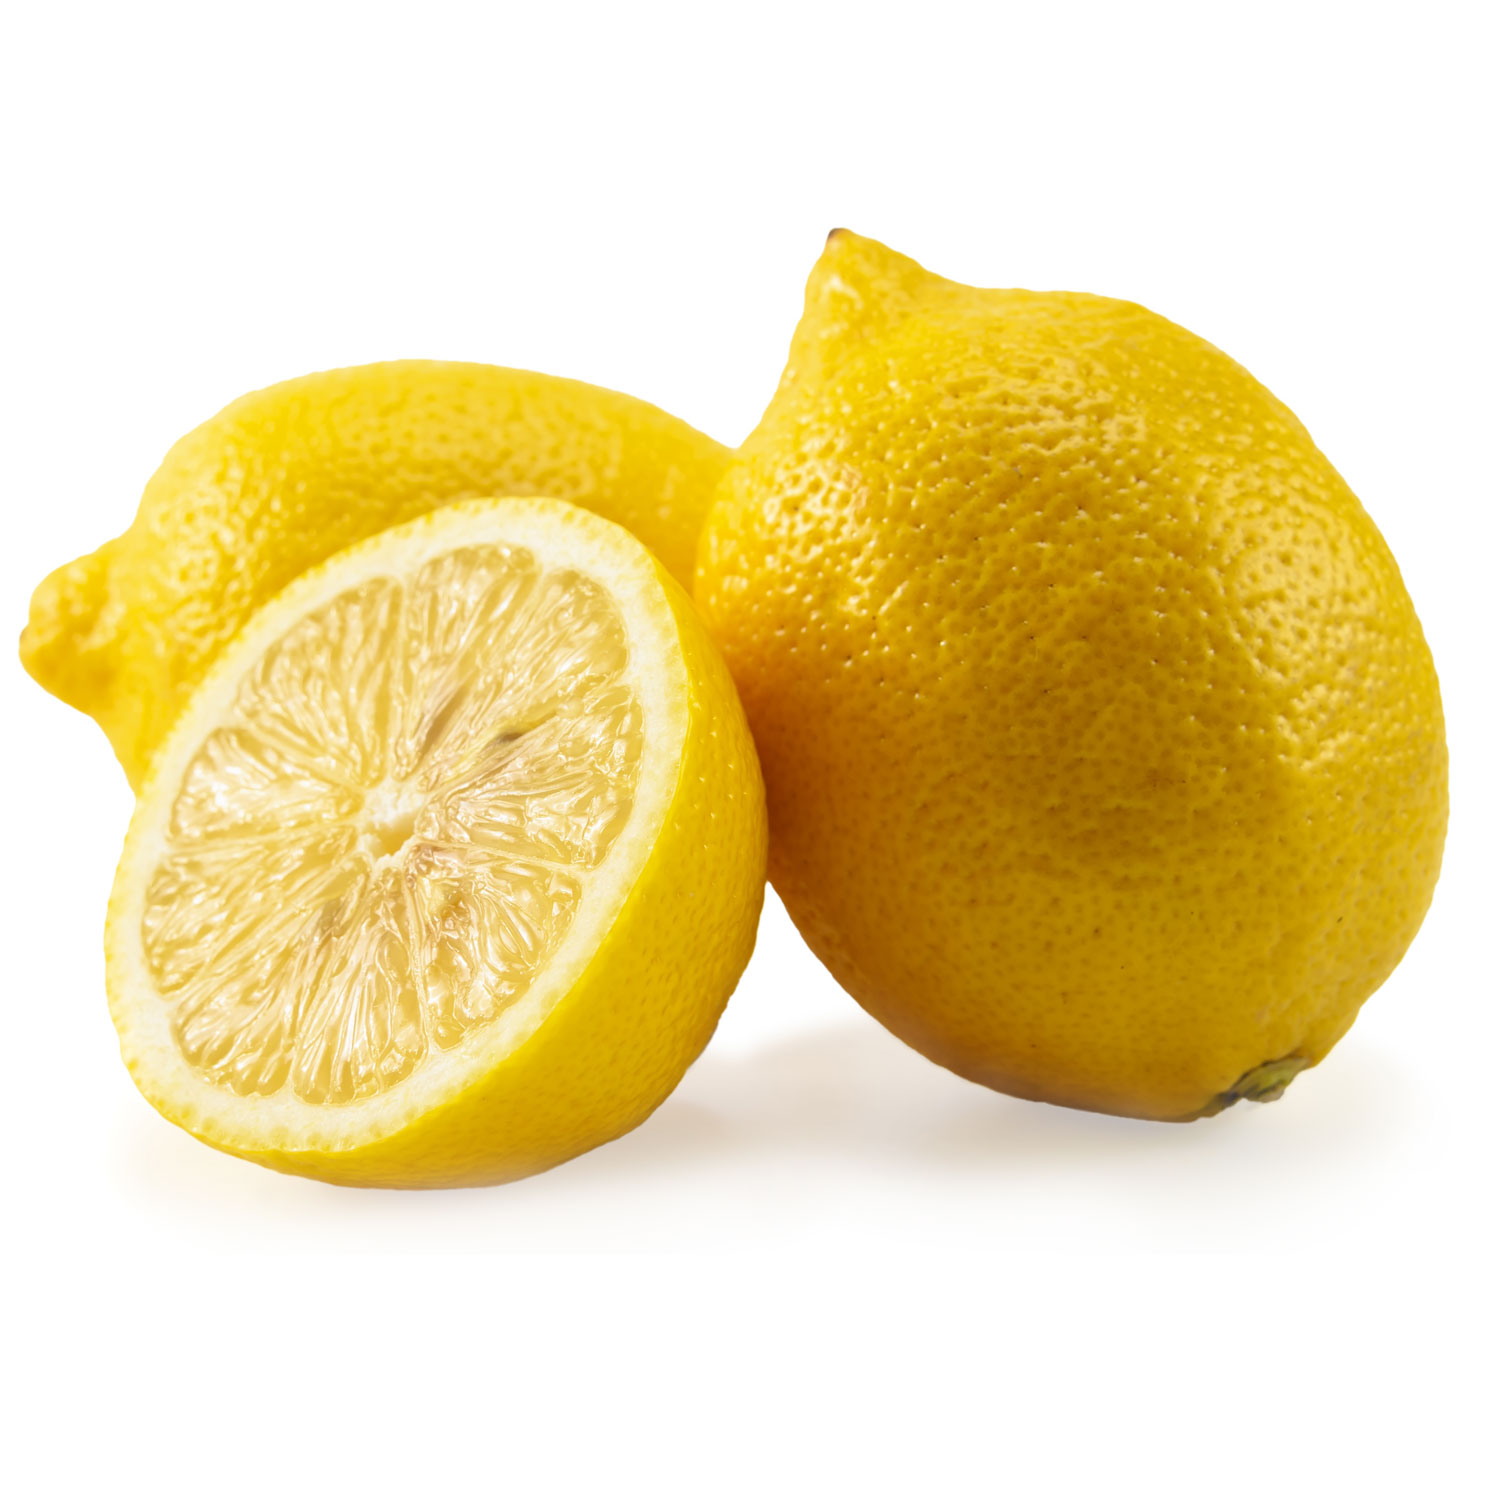 Can An Android Smell A Lemon?